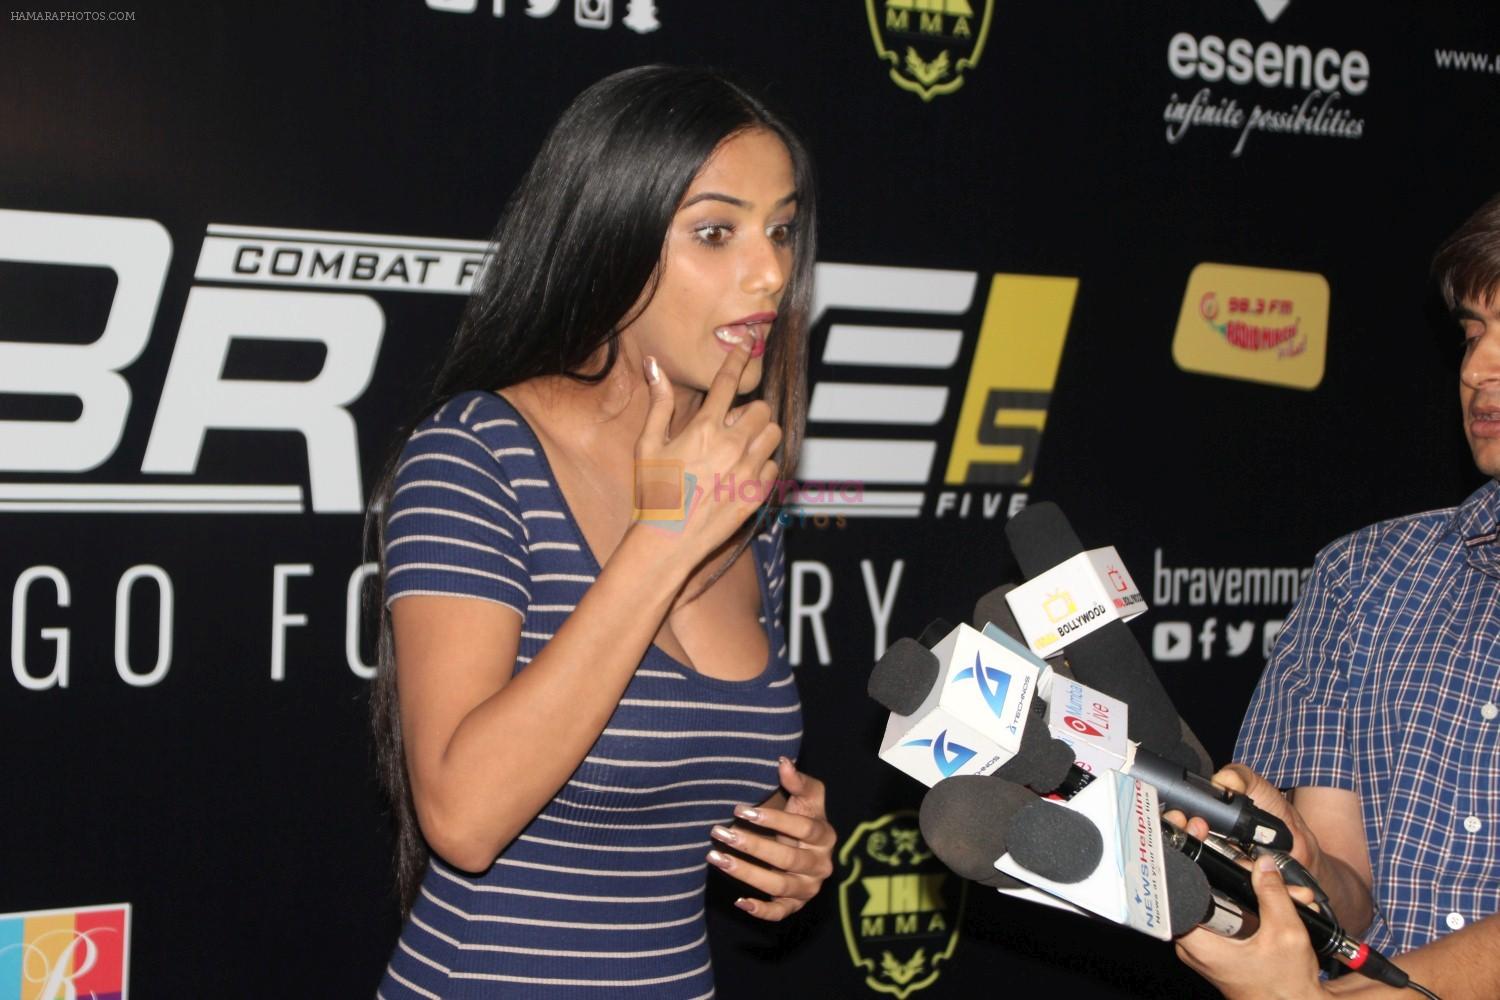 Poonam Pandey Launch Of Bahrains Brave Combat Federation With Mixed Martial Arts on 23rd April 2017